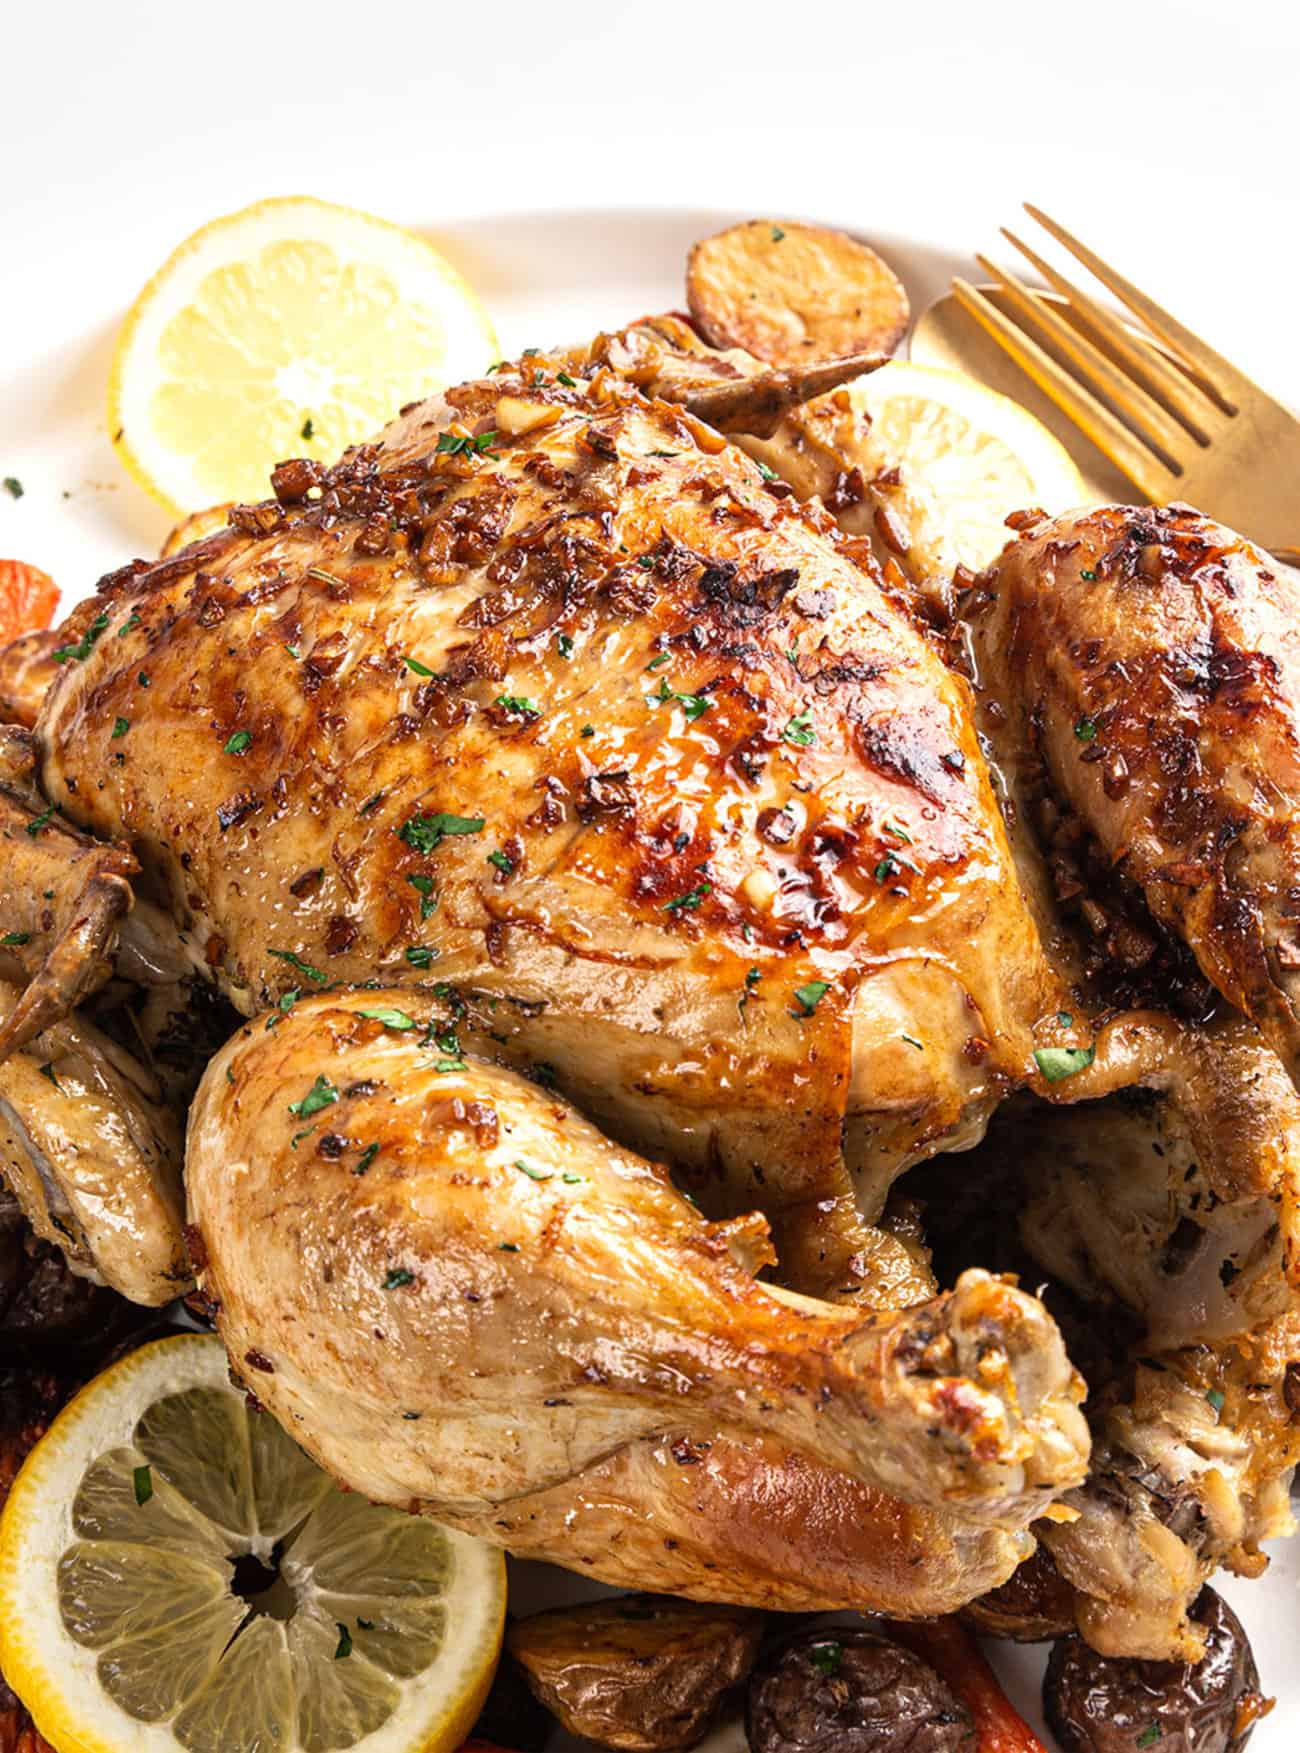 Whole Roasted Chicken with Lemon and Rosemary - Skinnytaste